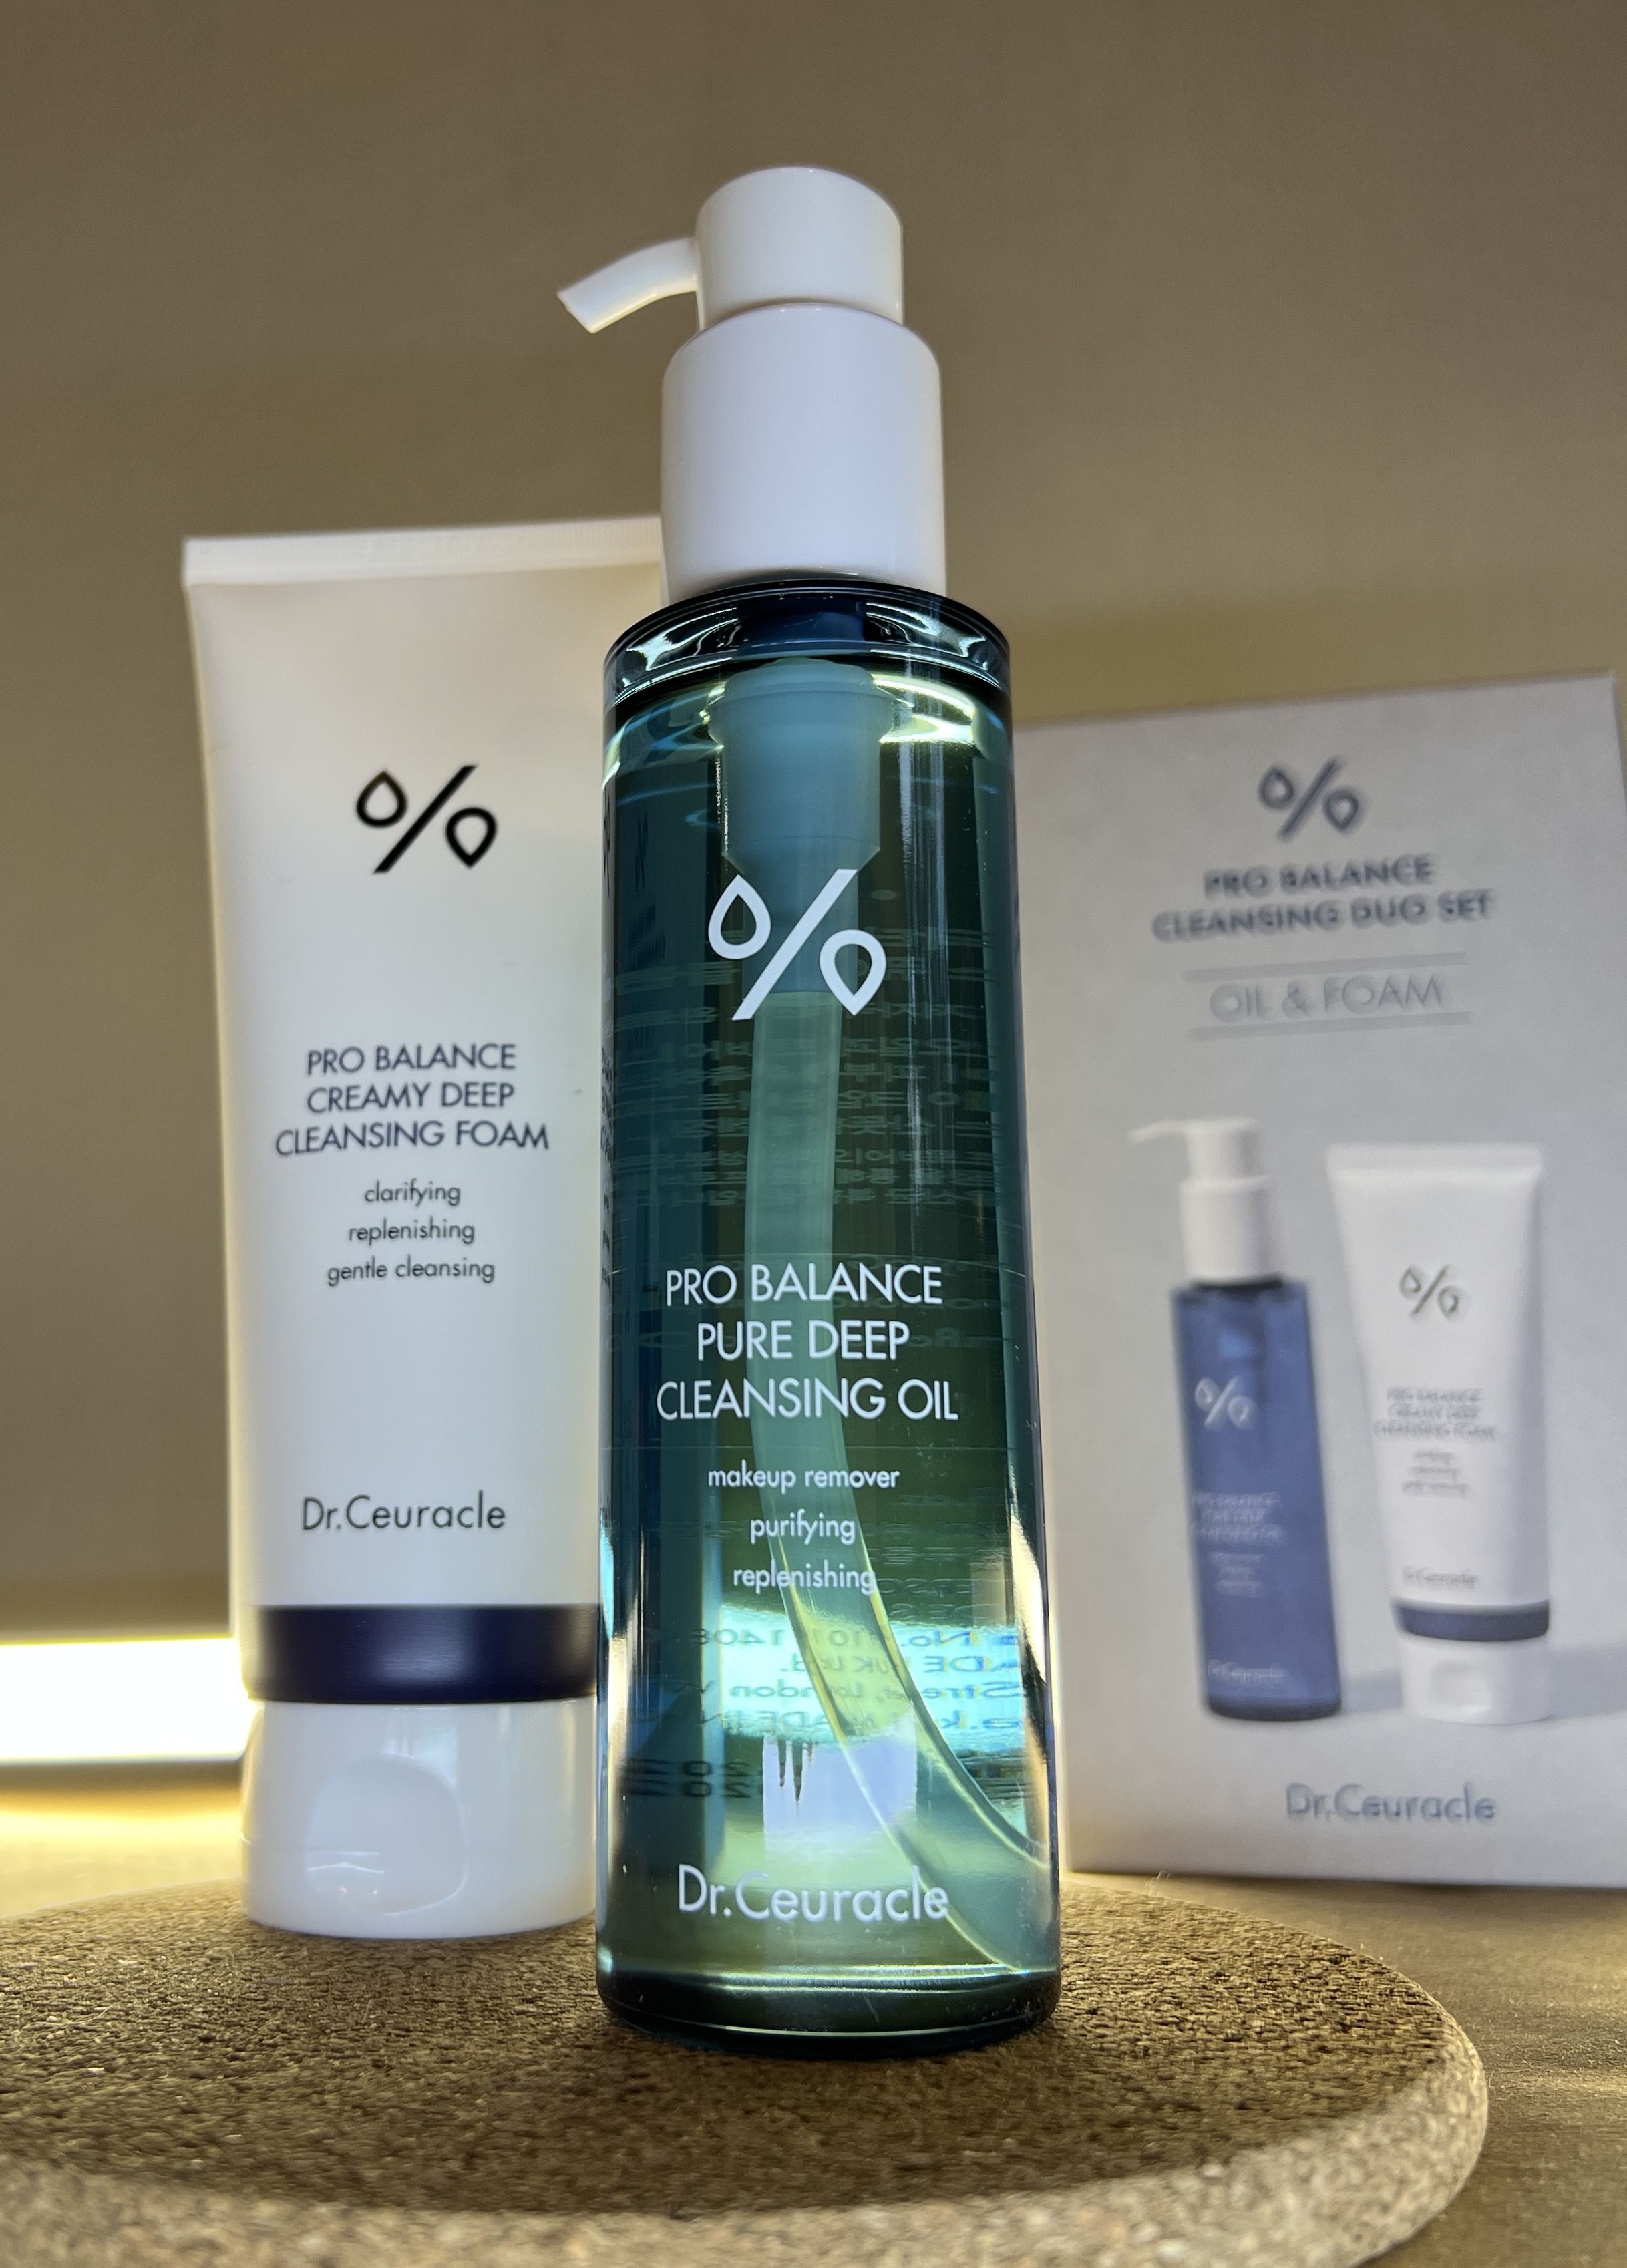 Dr ceuracle pro balance pure cleansing. Dr.ceuracle Pro Balance Cleansing Duo Set. Pro Balance Cleansing Duo collection. Pro Balance Cleansing Duo Set Oil Foam. Dr.ceuracle creamy Cleansing Duo Set.